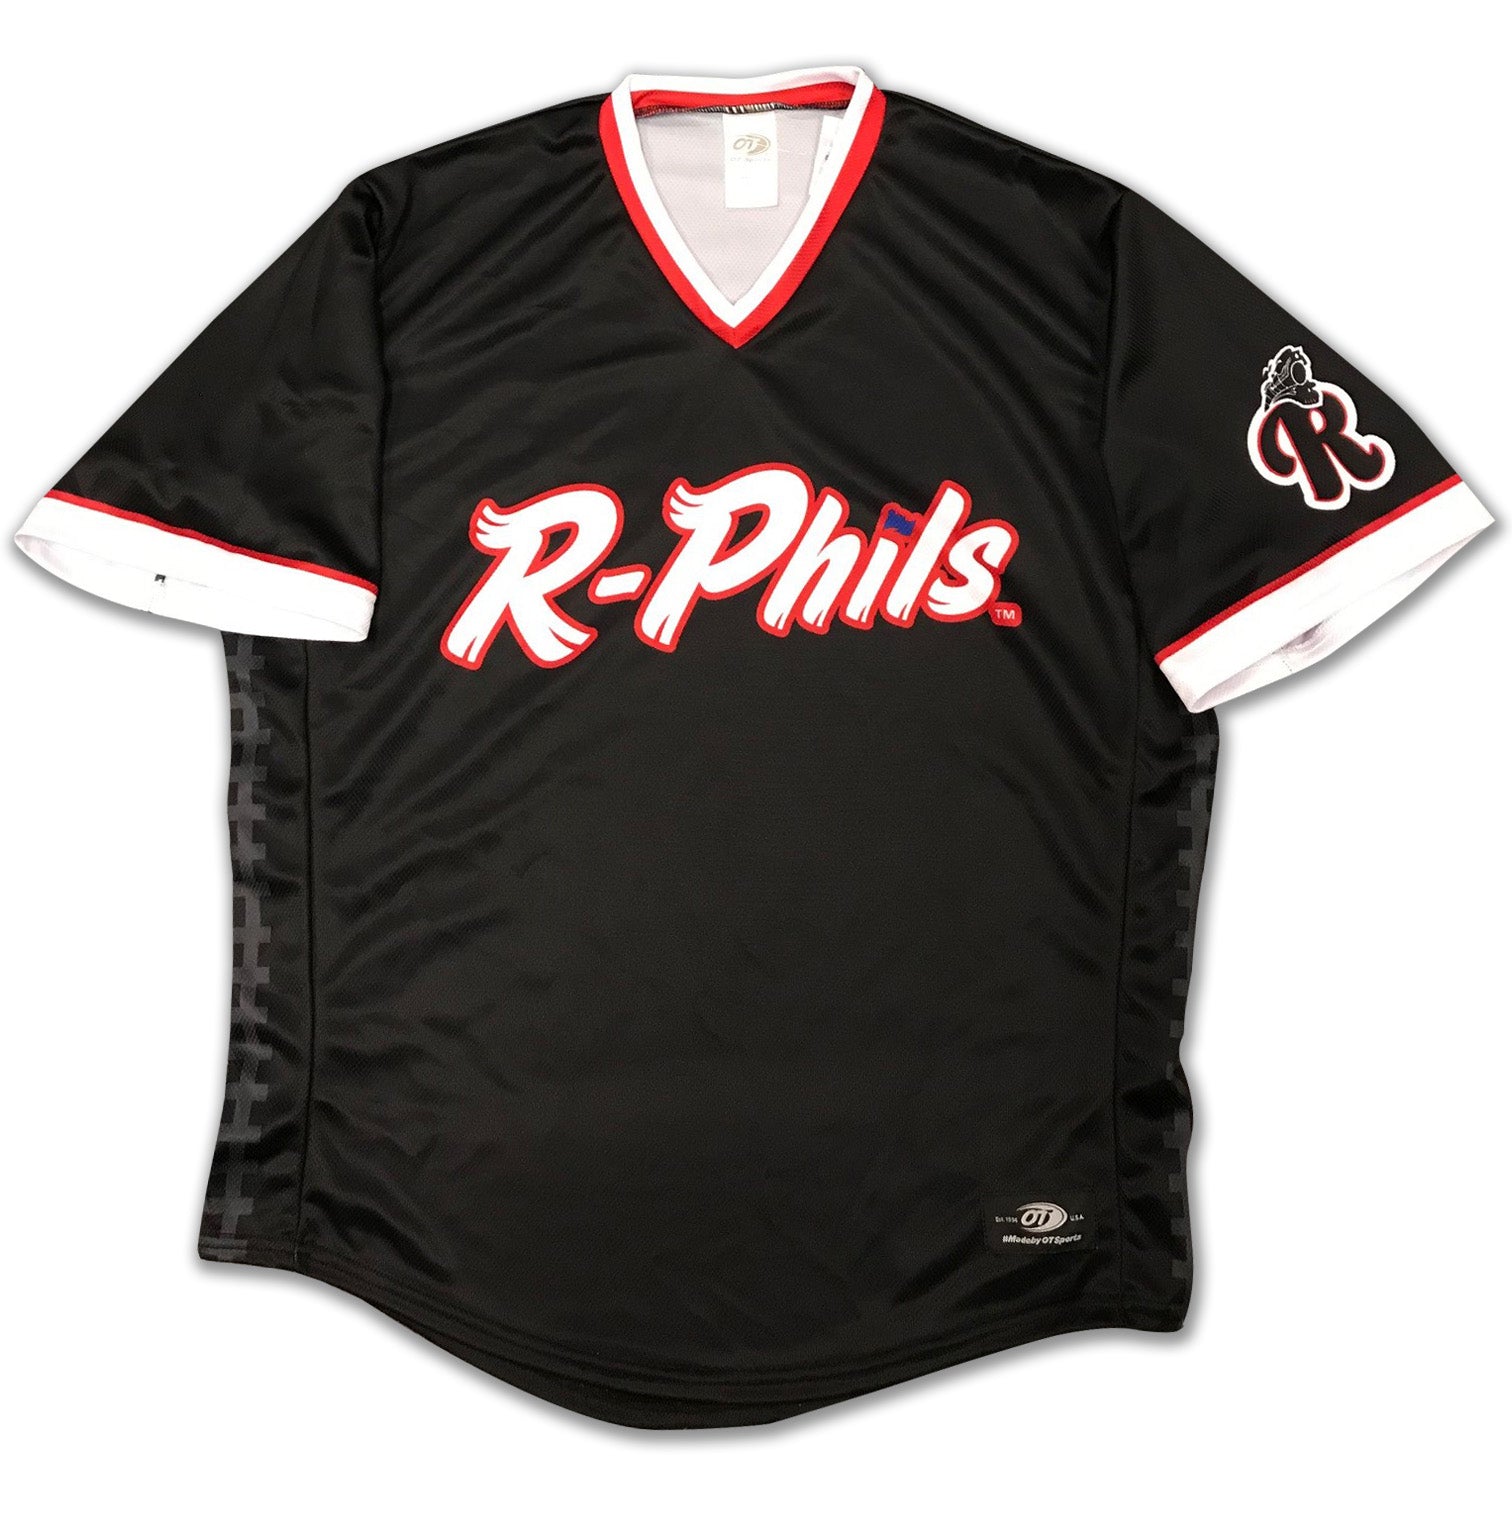 OT Sports Personalized Reading Fightin Phils on Field Replica Youth Throwback Thursday Black Train Home Jersey Youth MD